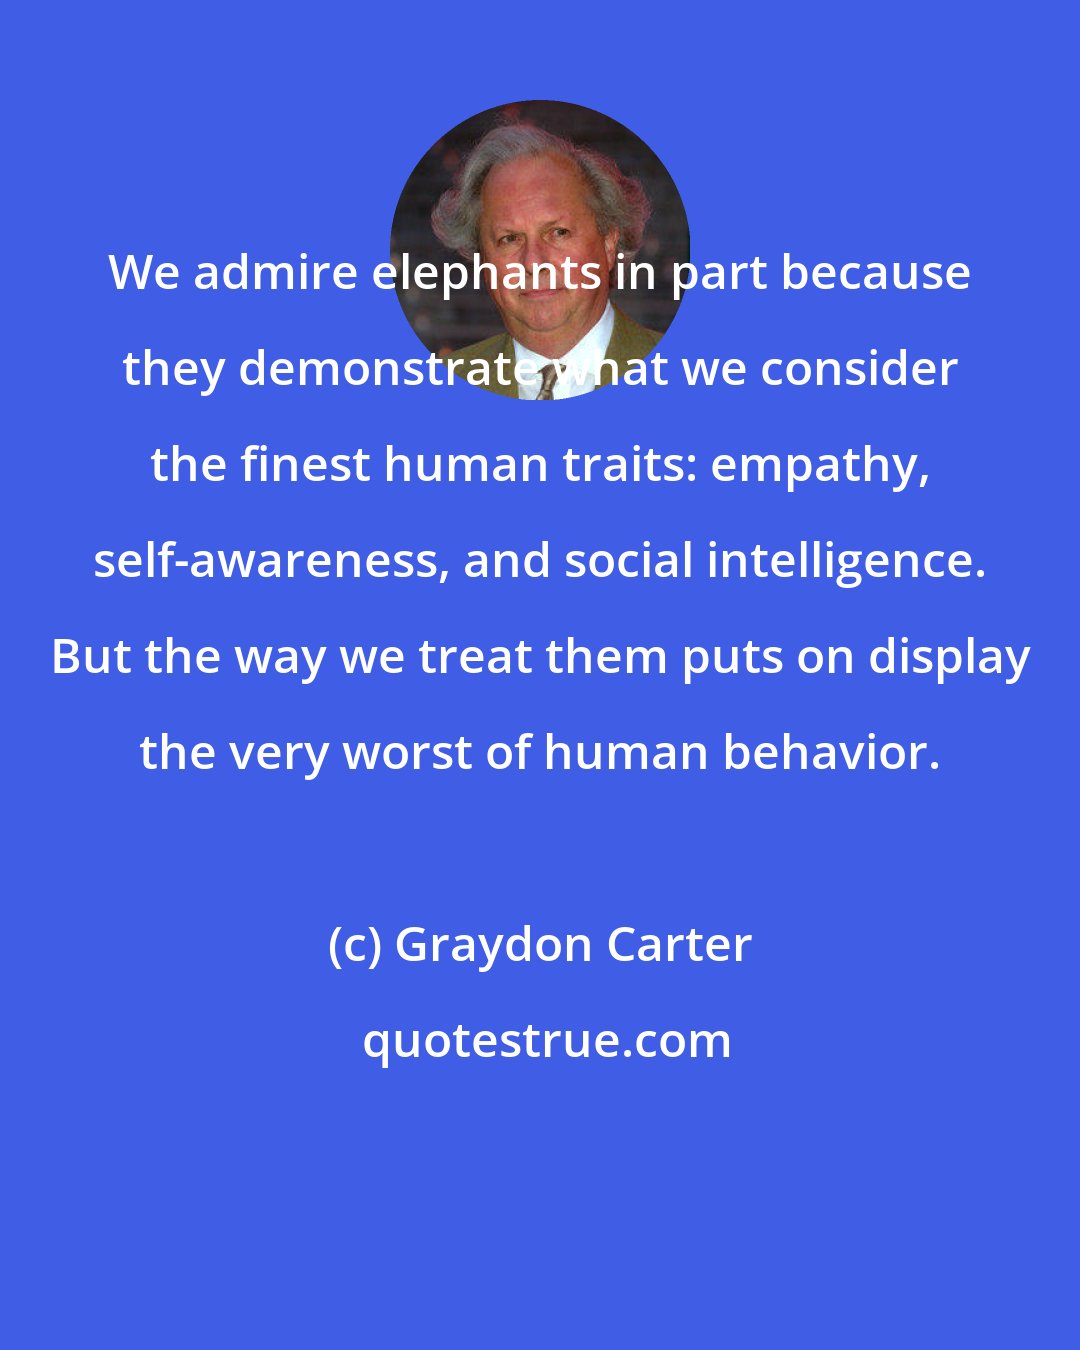 Graydon Carter: We admire elephants in part because they demonstrate what we consider the finest human traits: empathy, self-awareness, and social intelligence. But the way we treat them puts on display the very worst of human behavior.